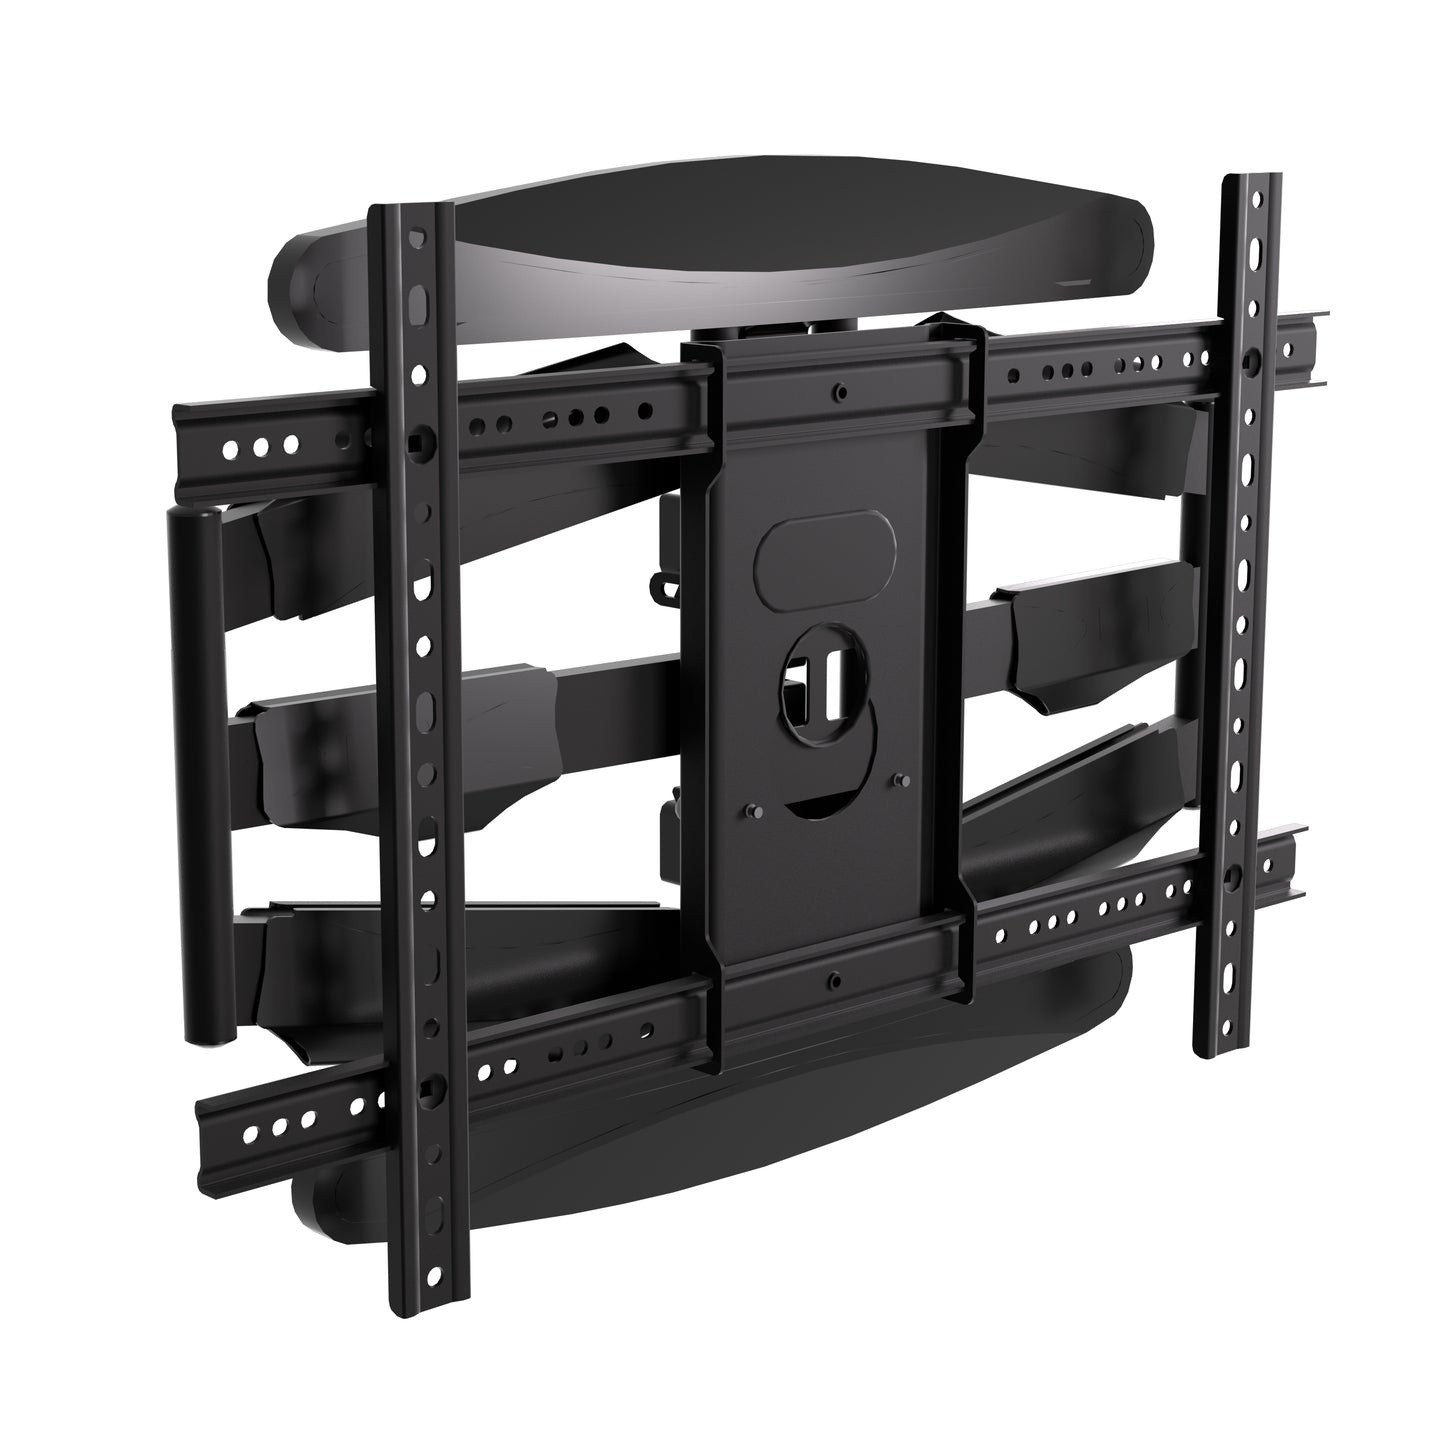 ProMounts Full Motion / Articulating TV Wall Mount for 42" to 85" TVs Holds Up to 100lbs (MA641)